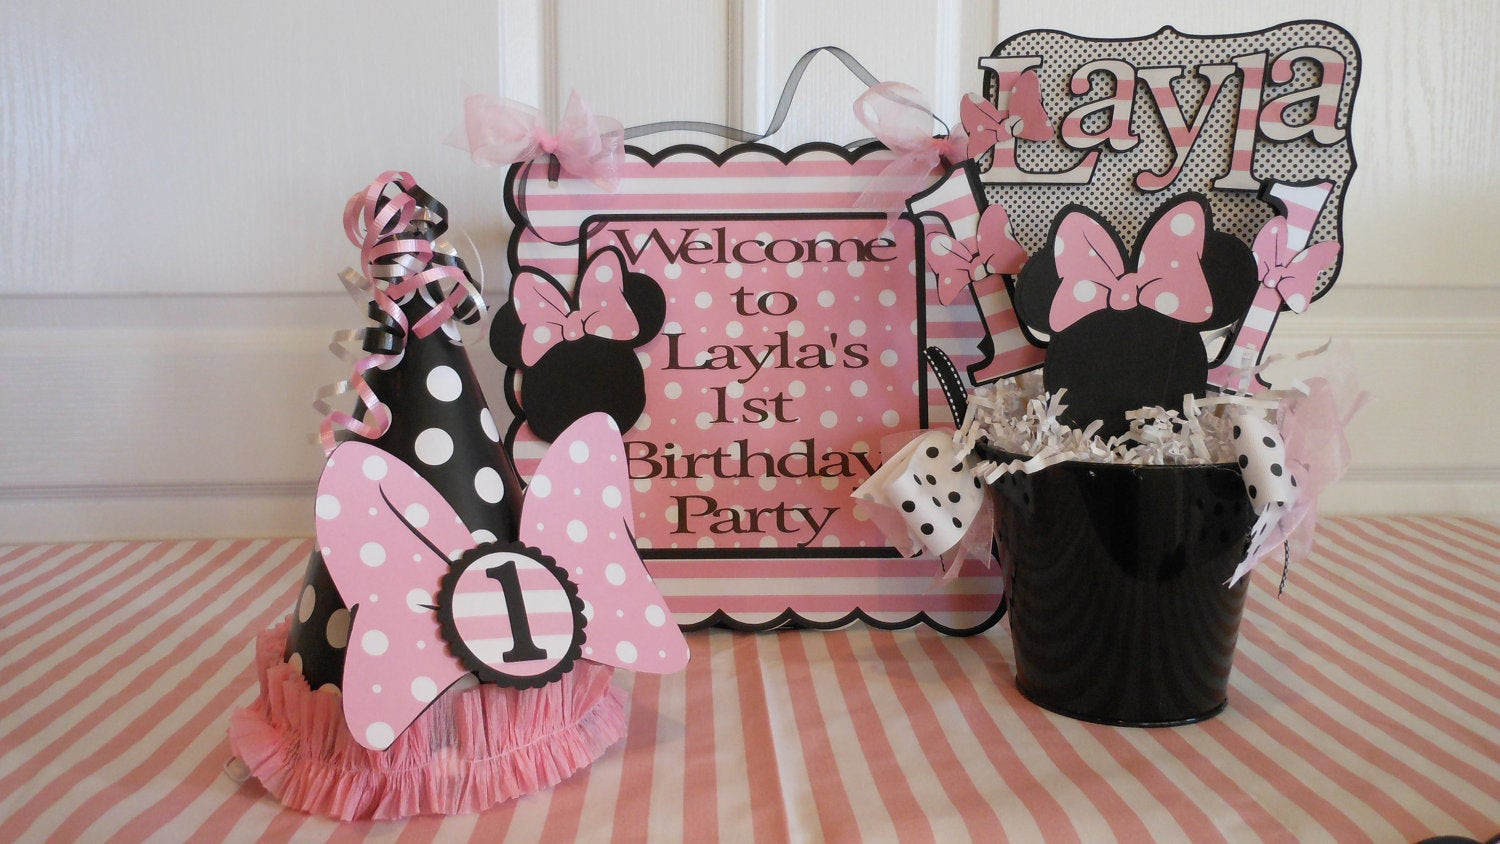 Minnie Mouse 1st Birthday Decorations
 Minnie Mouse Polka Dot 1st Birthday Party by ASweetCelebration